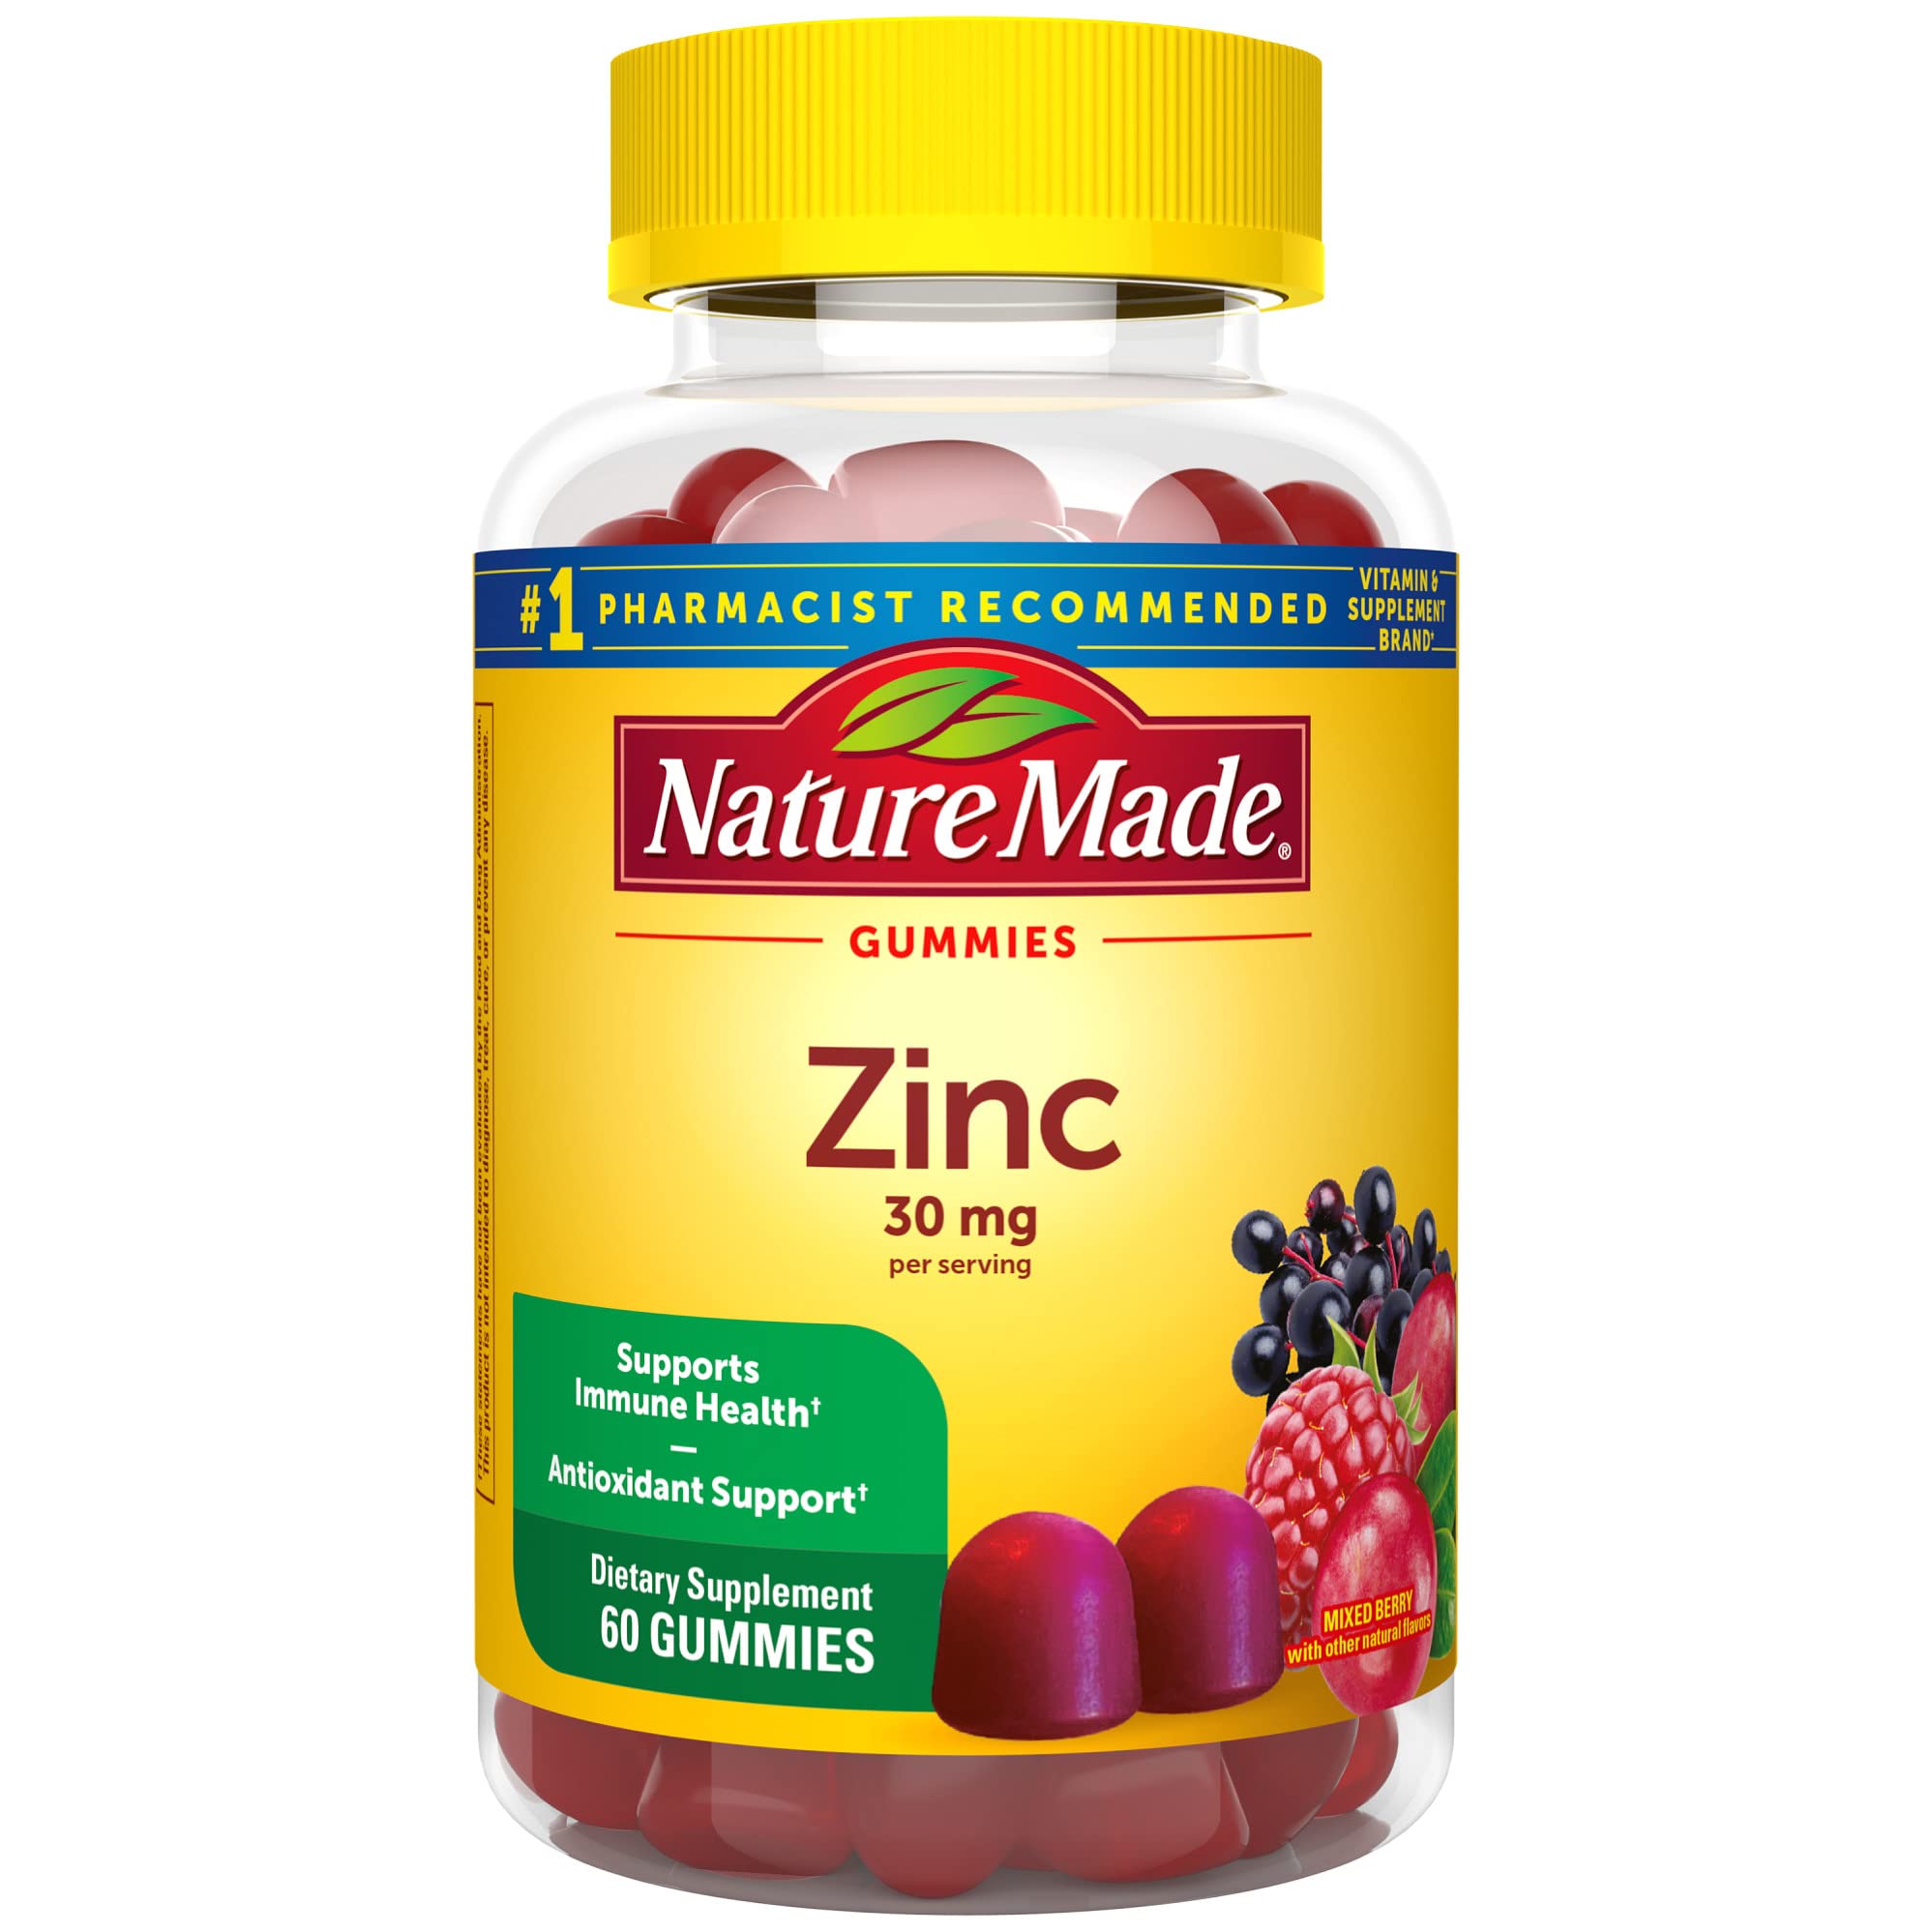 Nature Made Extra Strength Zinc Supplements 30 mg, Dietary Supplement for Immune Health and Antioxidant Support, 60 Zinc Gummies, 30 Day Supply